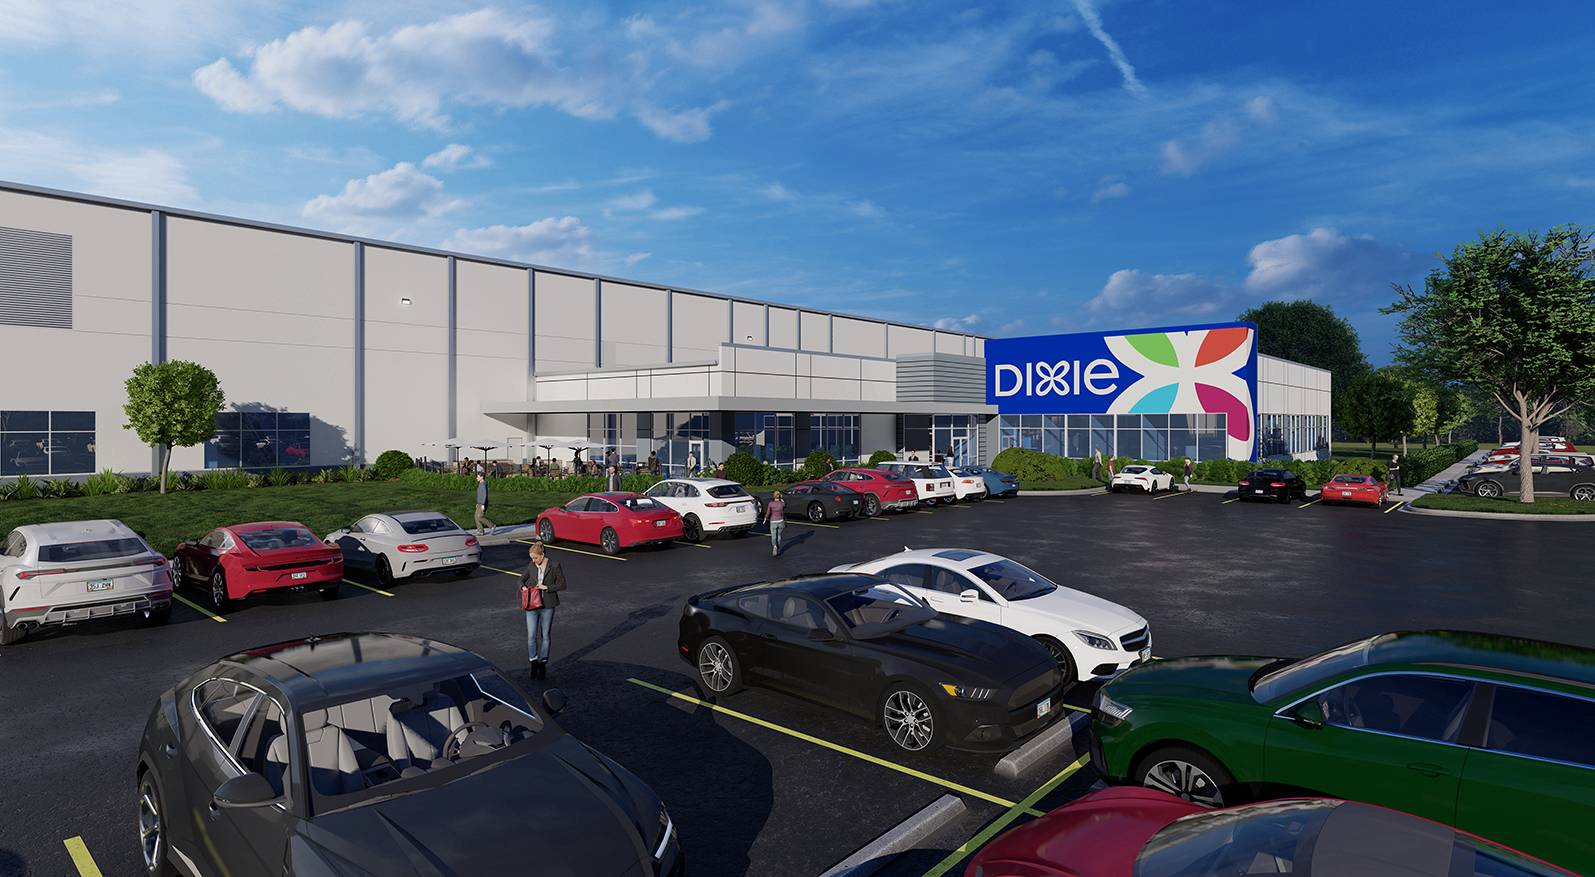 A rendering of Georgia-Pacific's Dixie plant in Jackson, Tenn., which is scheduled to open next year. Images; Courtesy of jE Dunn